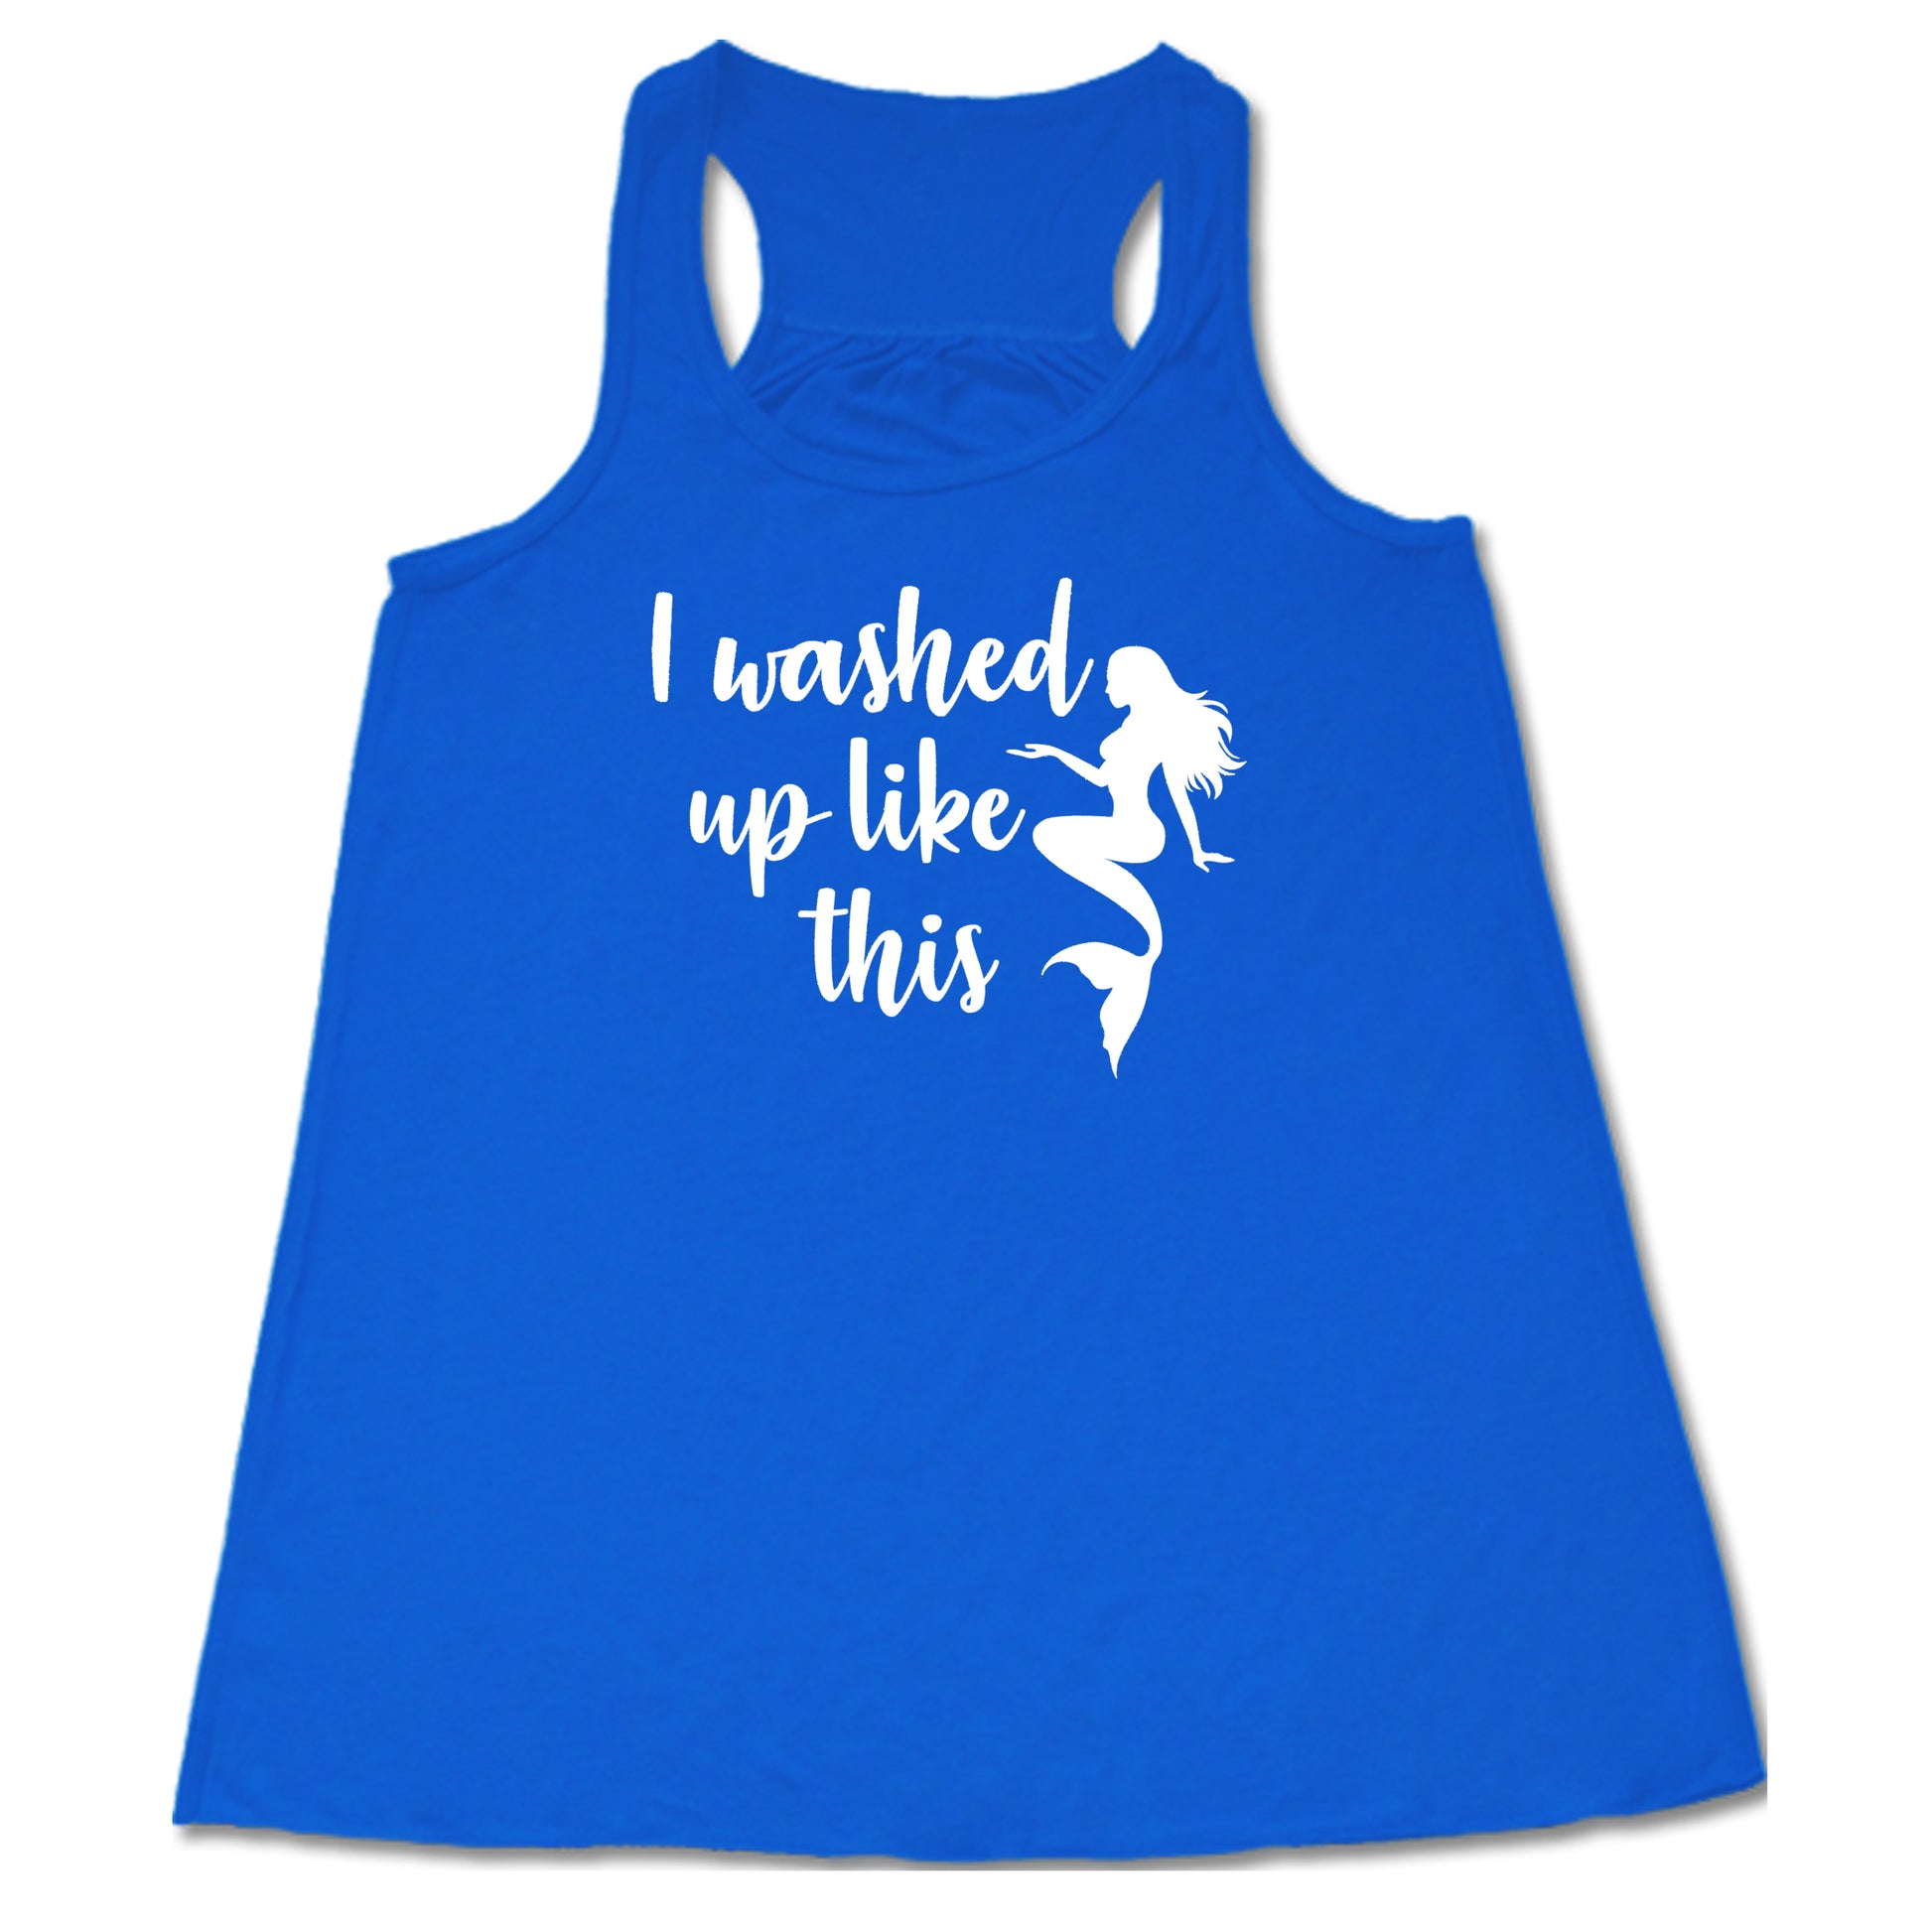 blue racerback tank with the saying "i washed up like this" in white in the center